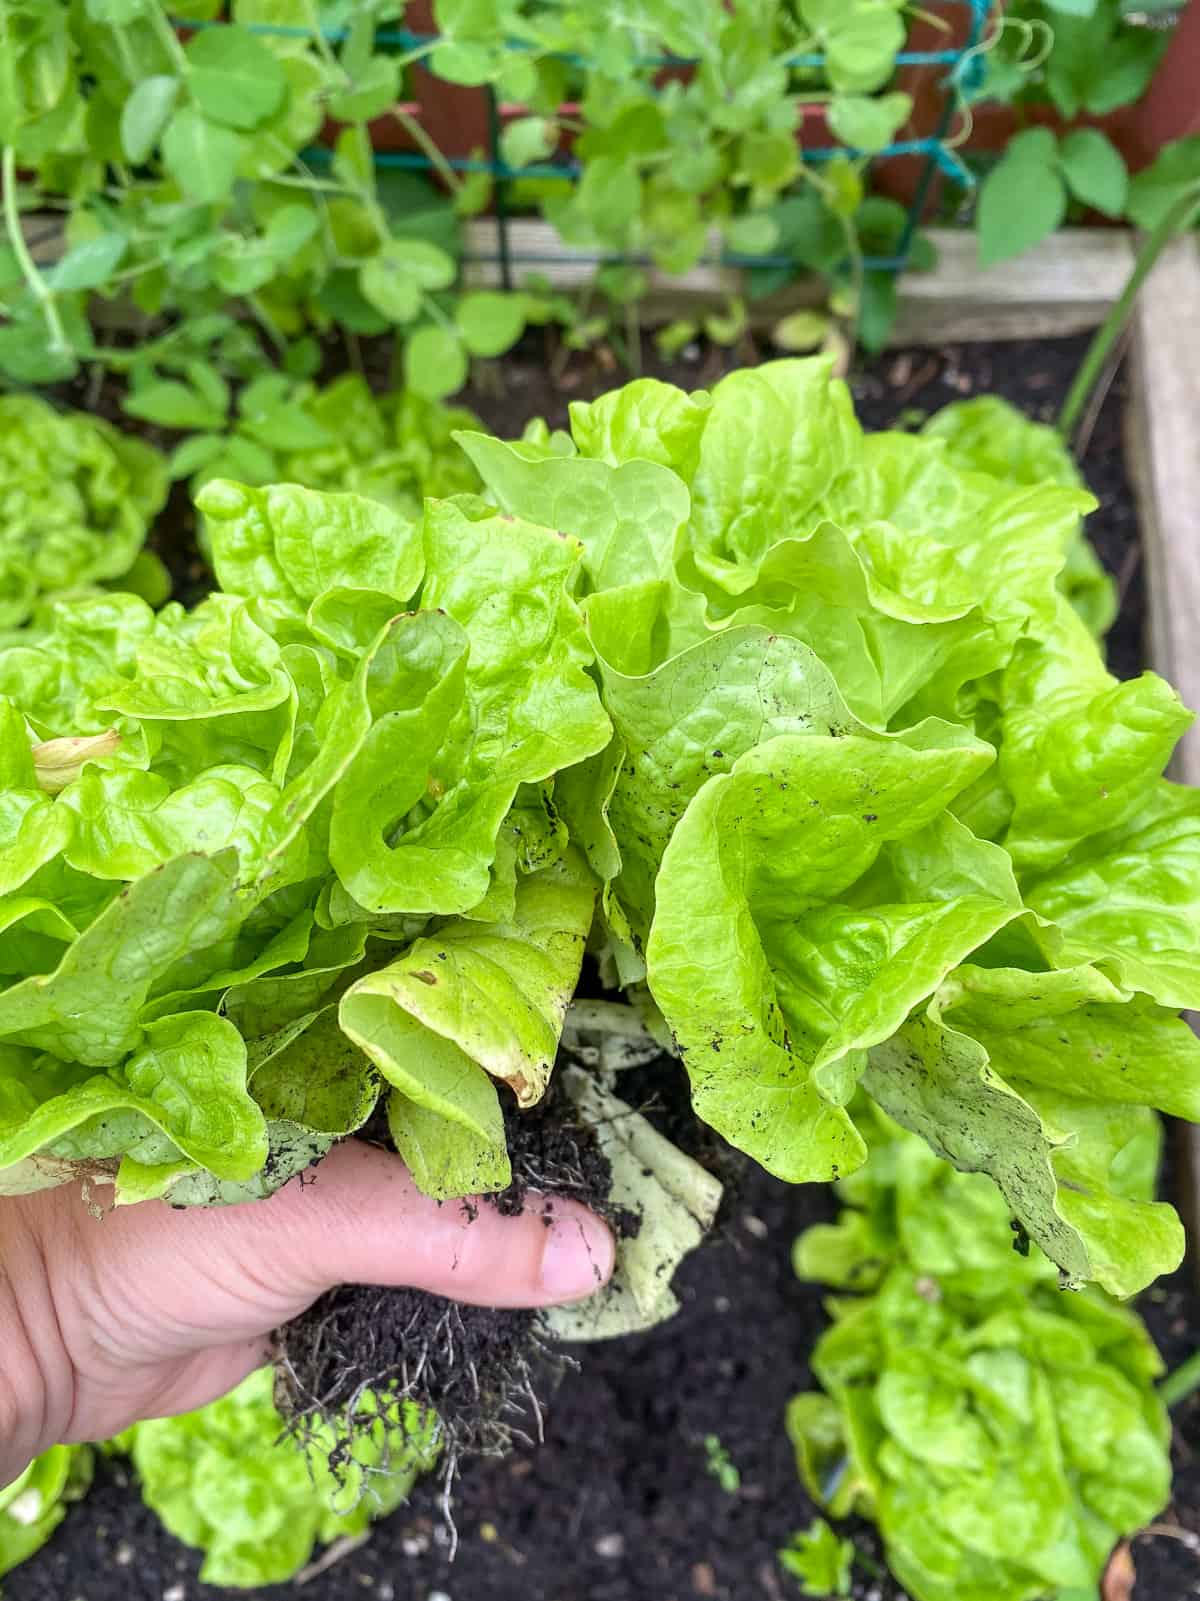 An image of a hand picking a small head of lettuce.